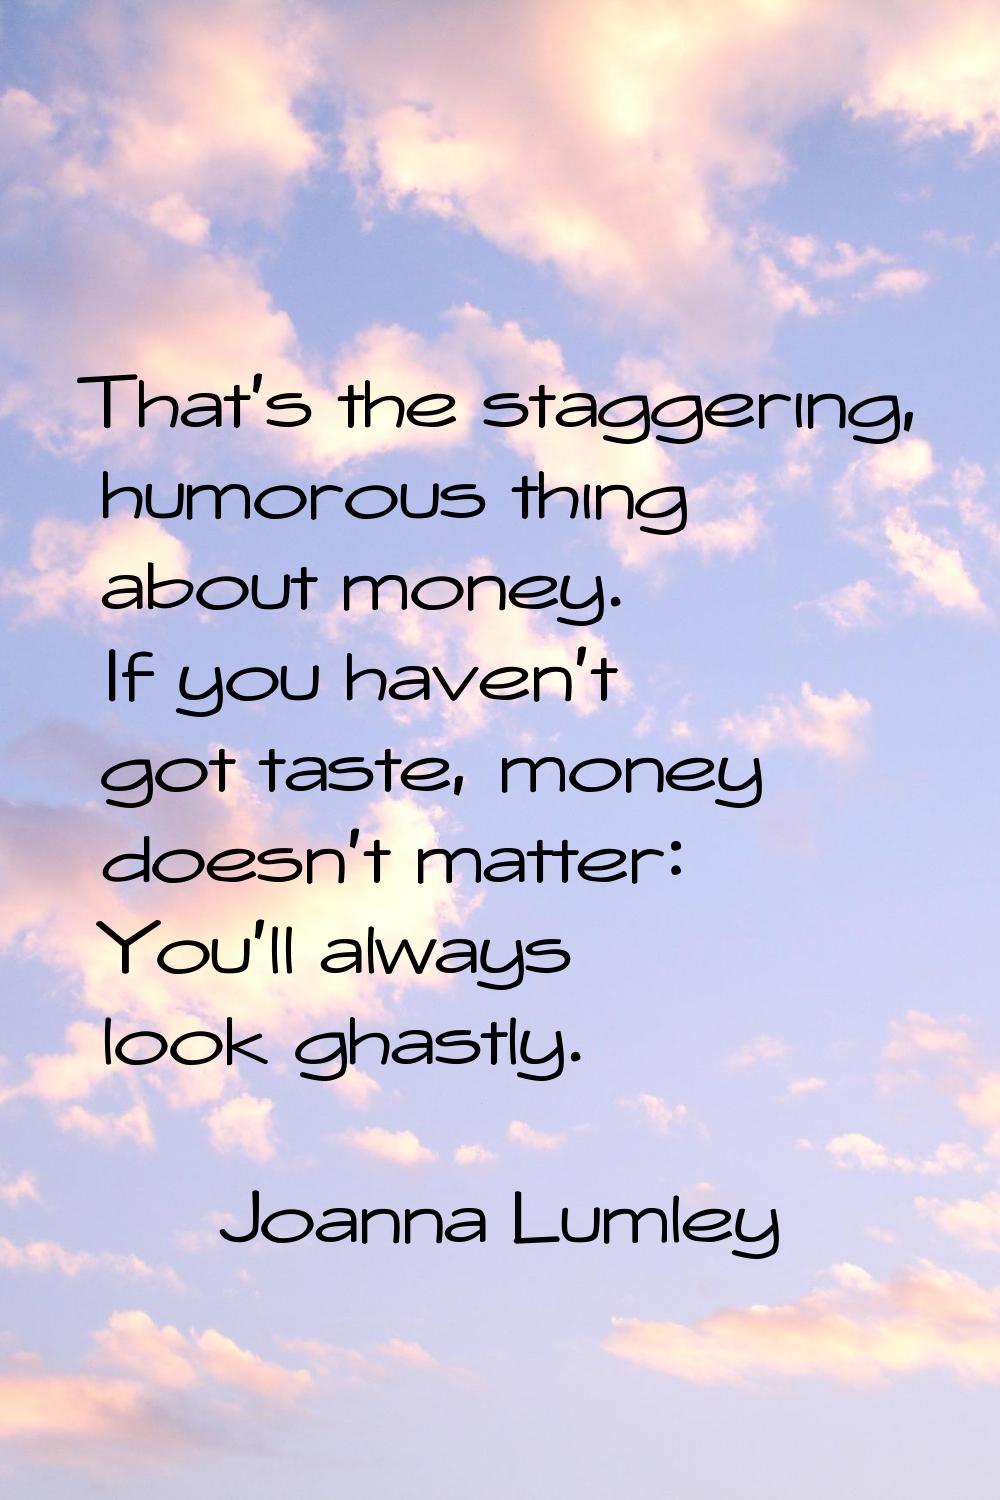 That's the staggering, humorous thing about money. If you haven't got taste, money doesn't matter: 